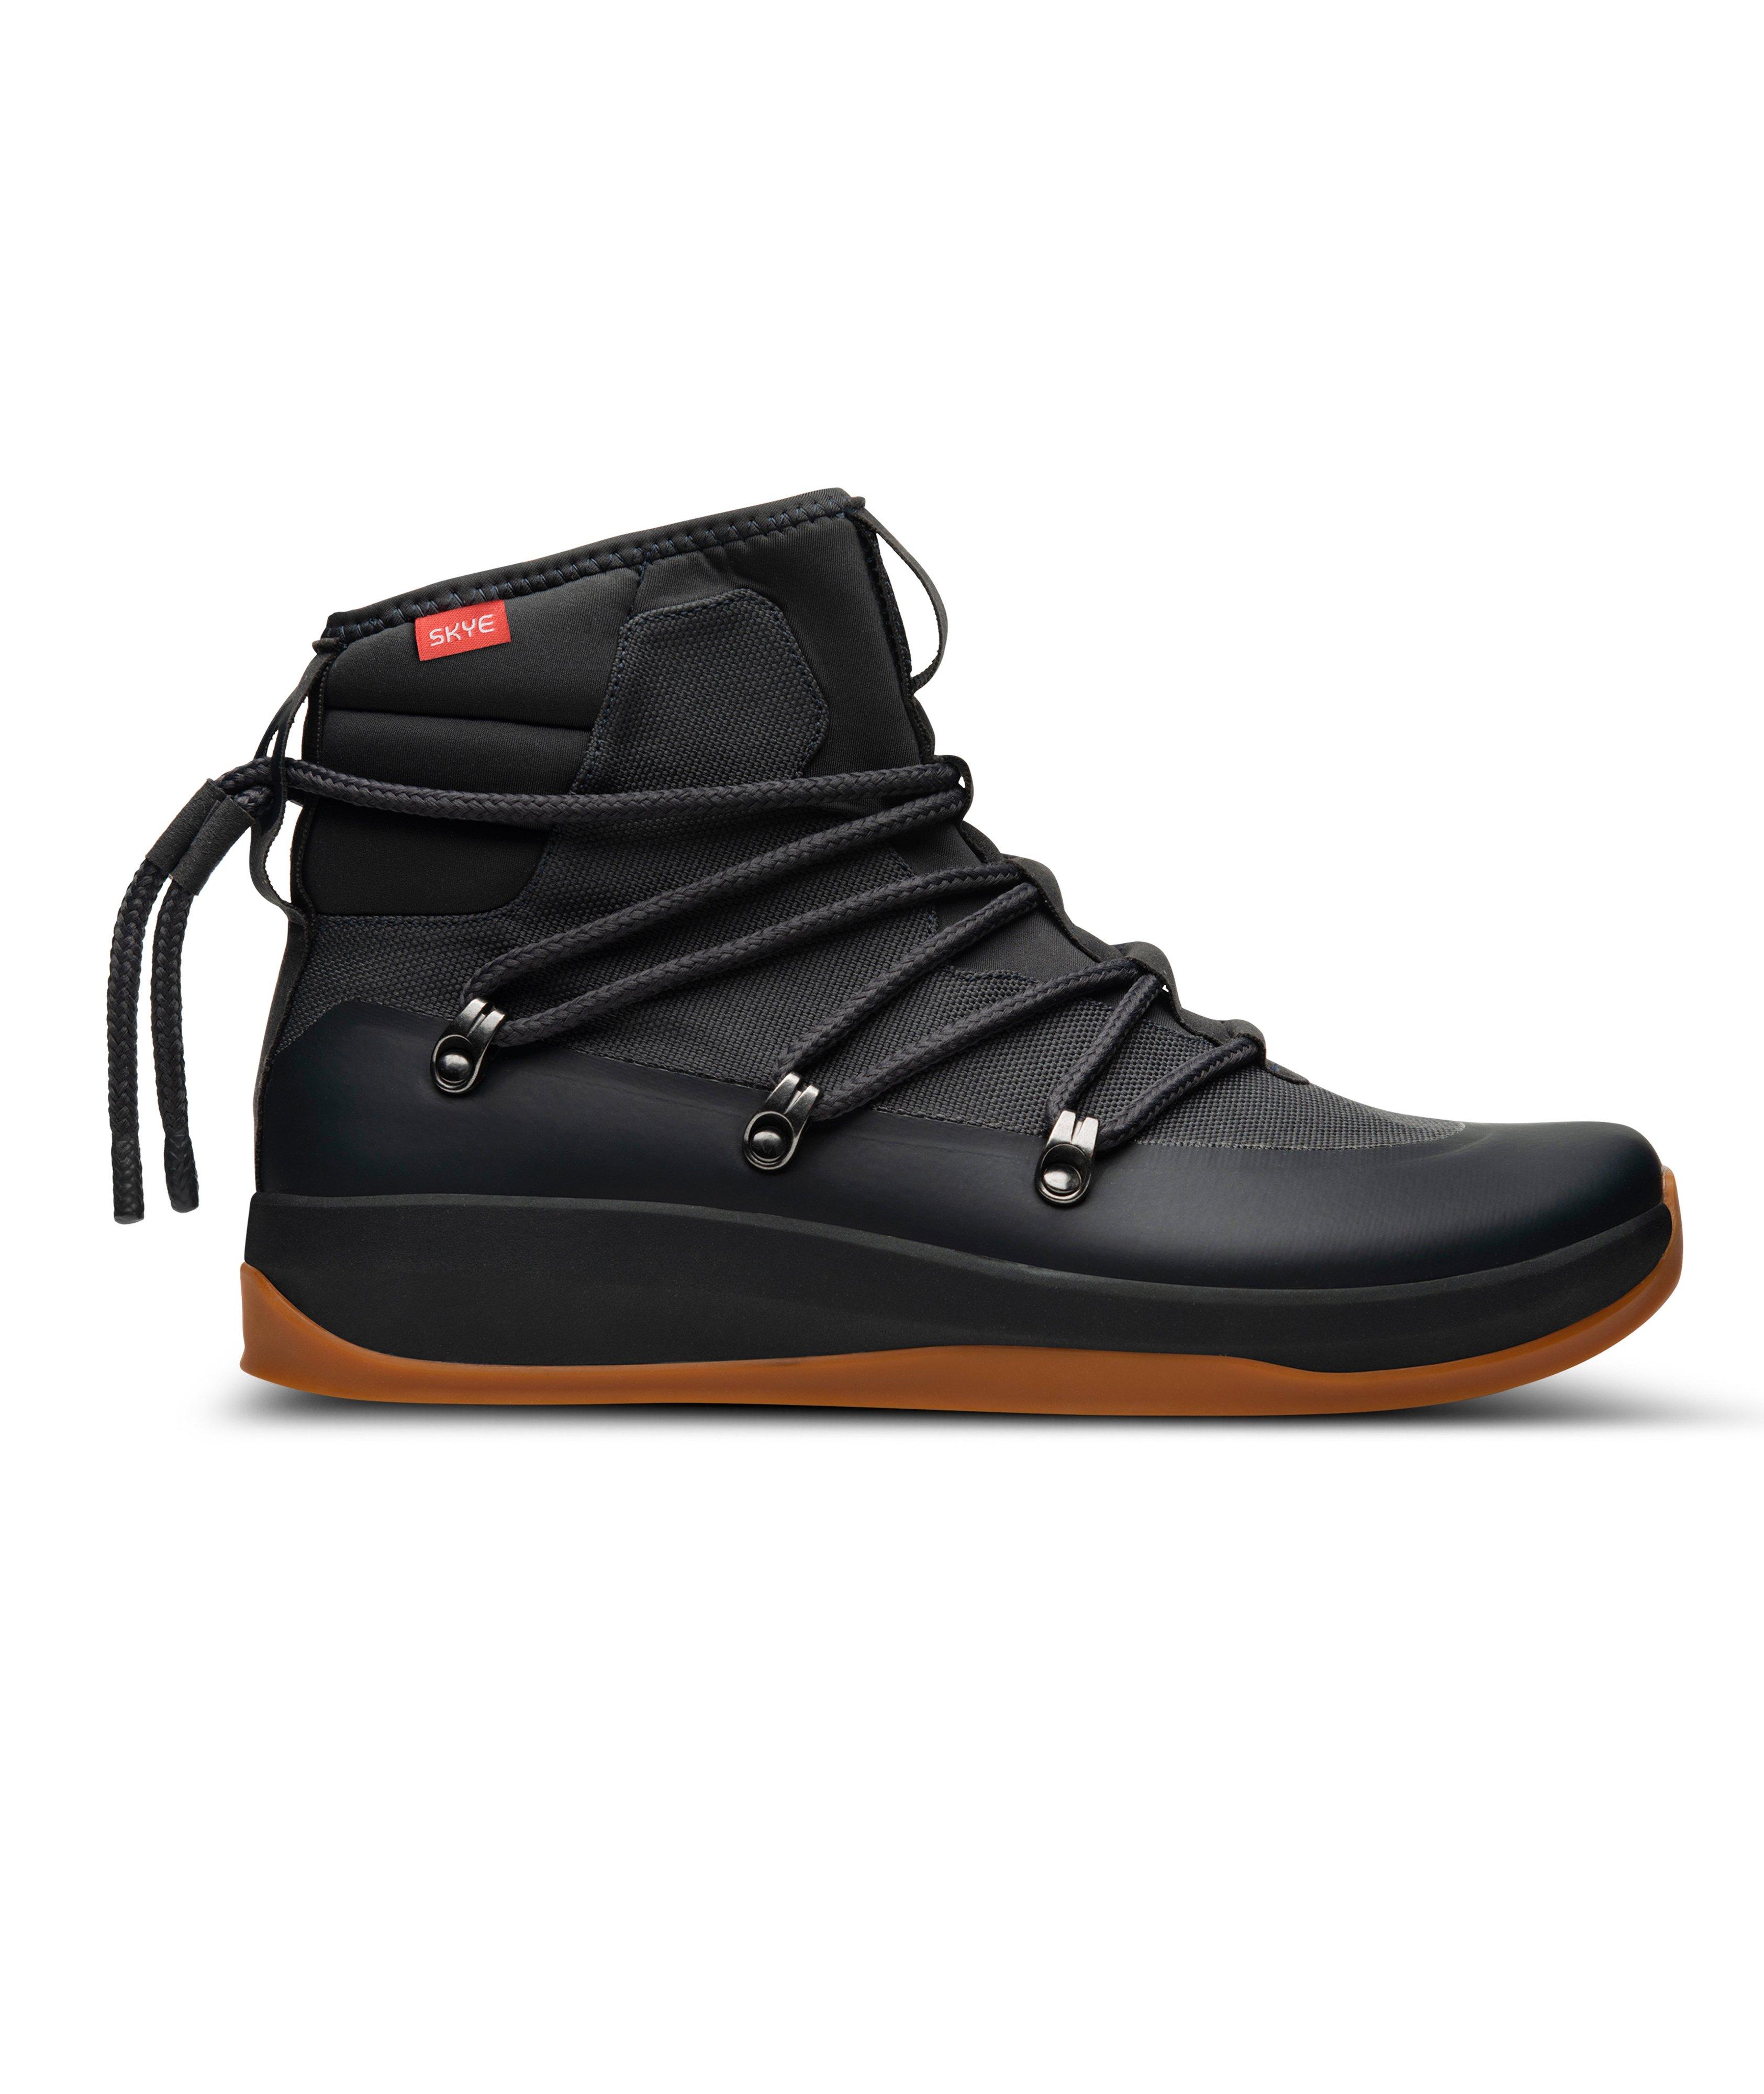 The Stnley 2.0 High-Top Sneaker Boots